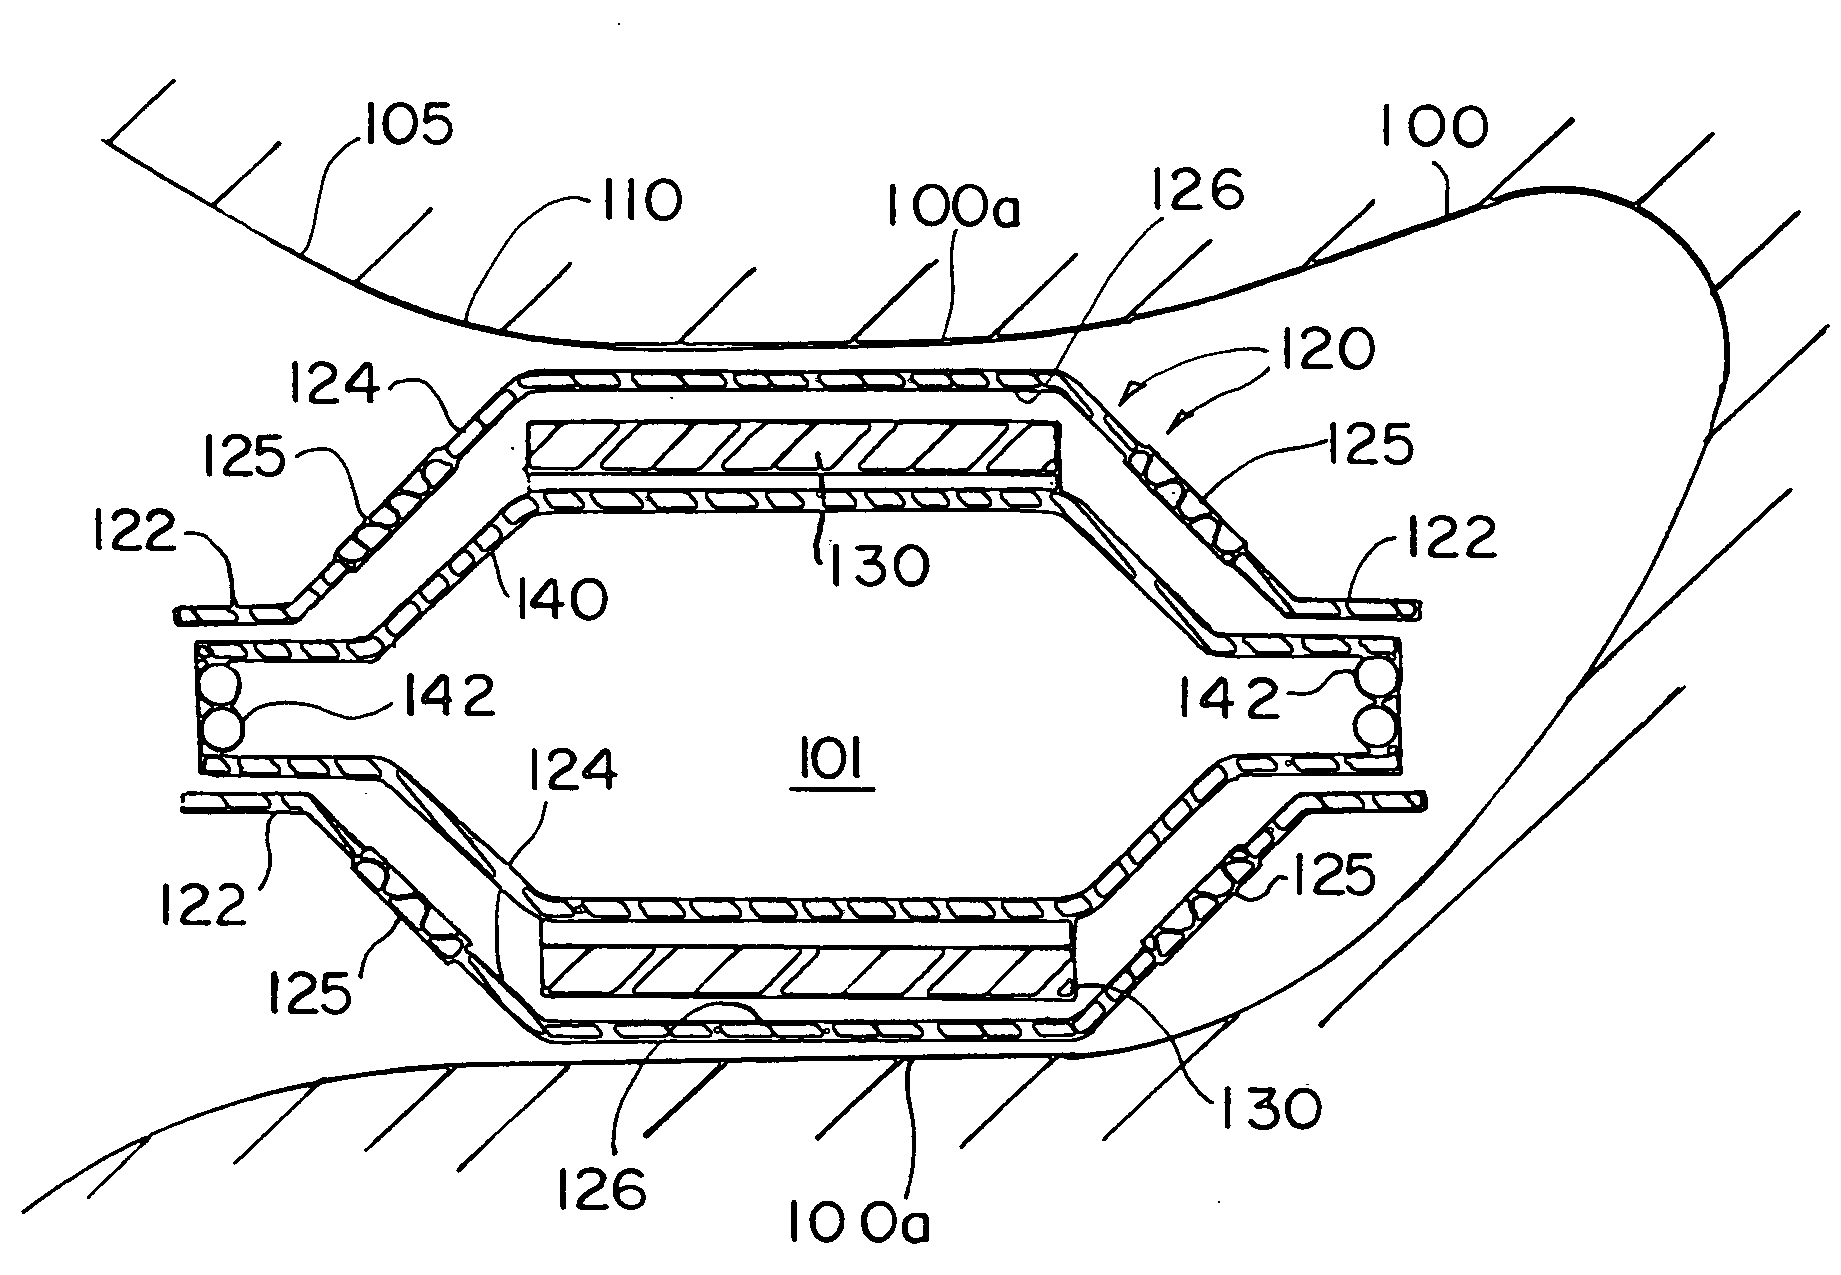 Expandable implant devices for filtering blood flow from atrial appendages